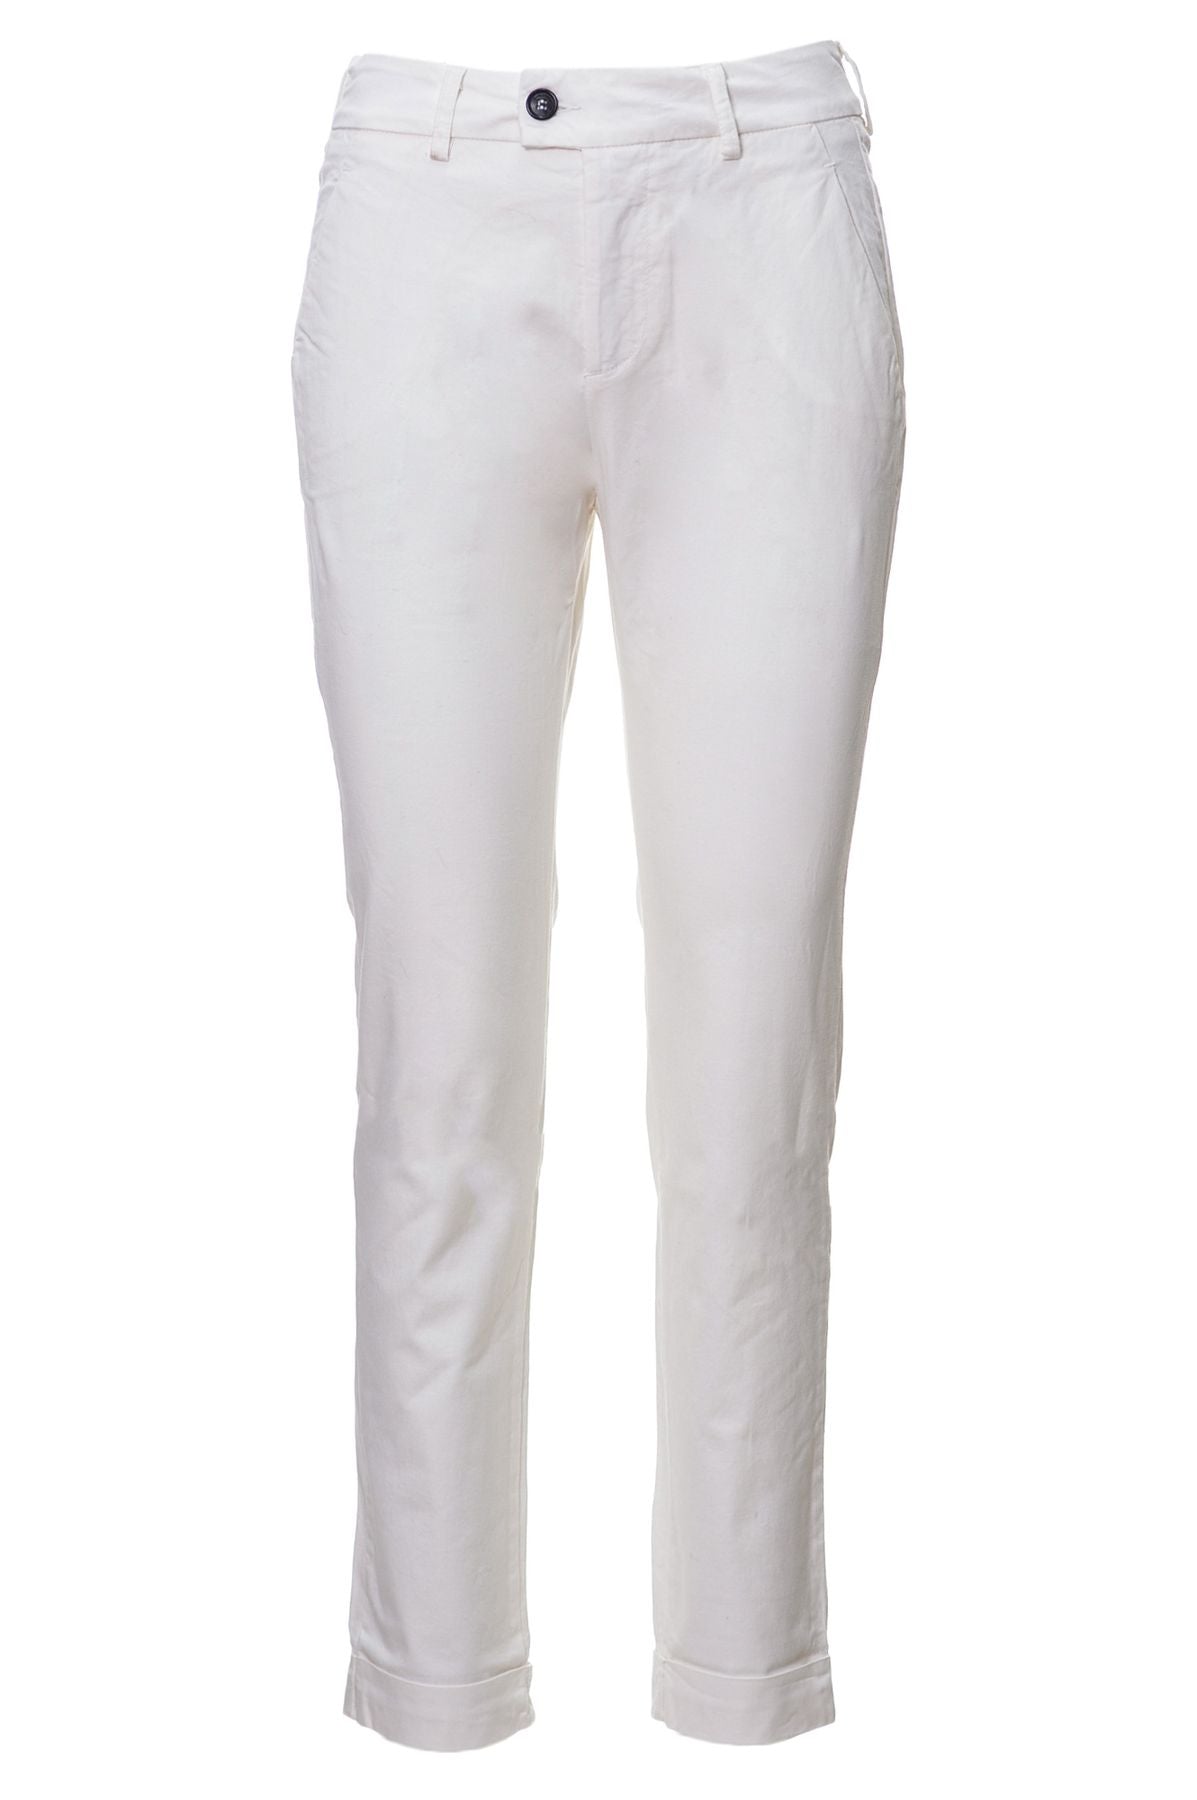 PEUTEREY Spring/Summer Cotton Trousers